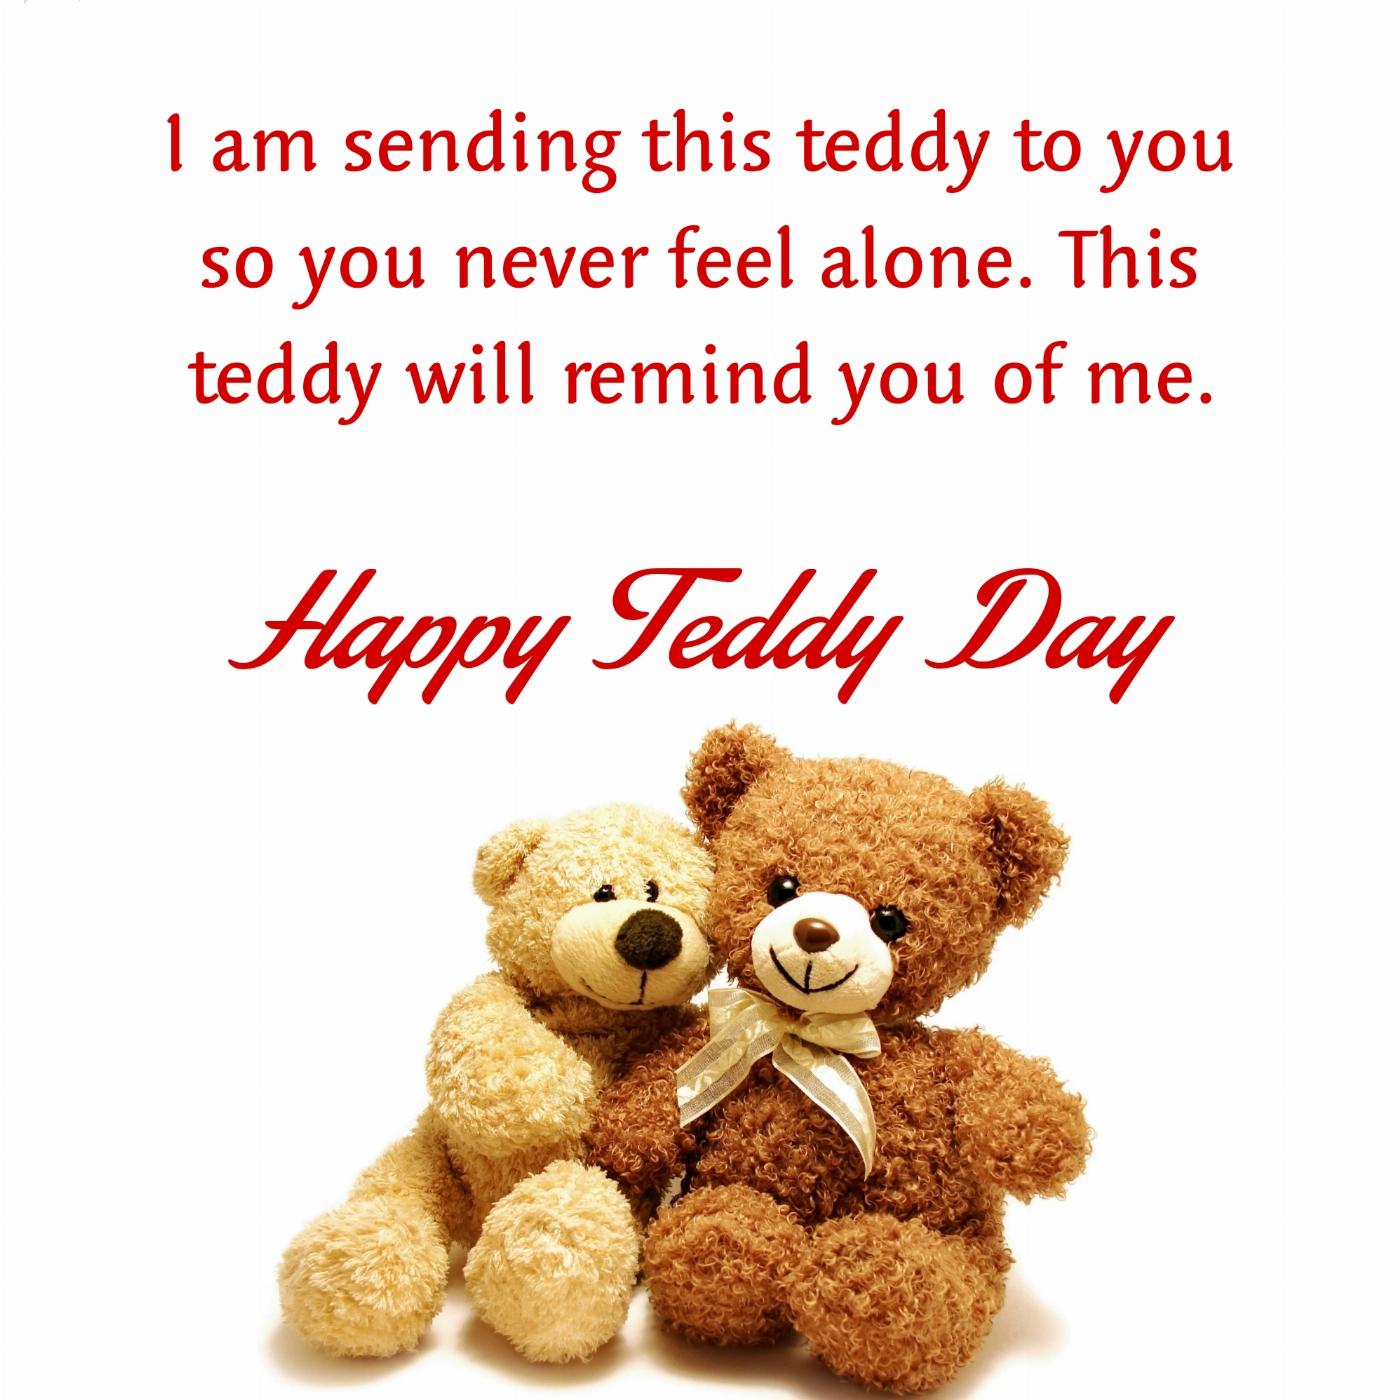 I am sending this teddy to you so you never feel alone